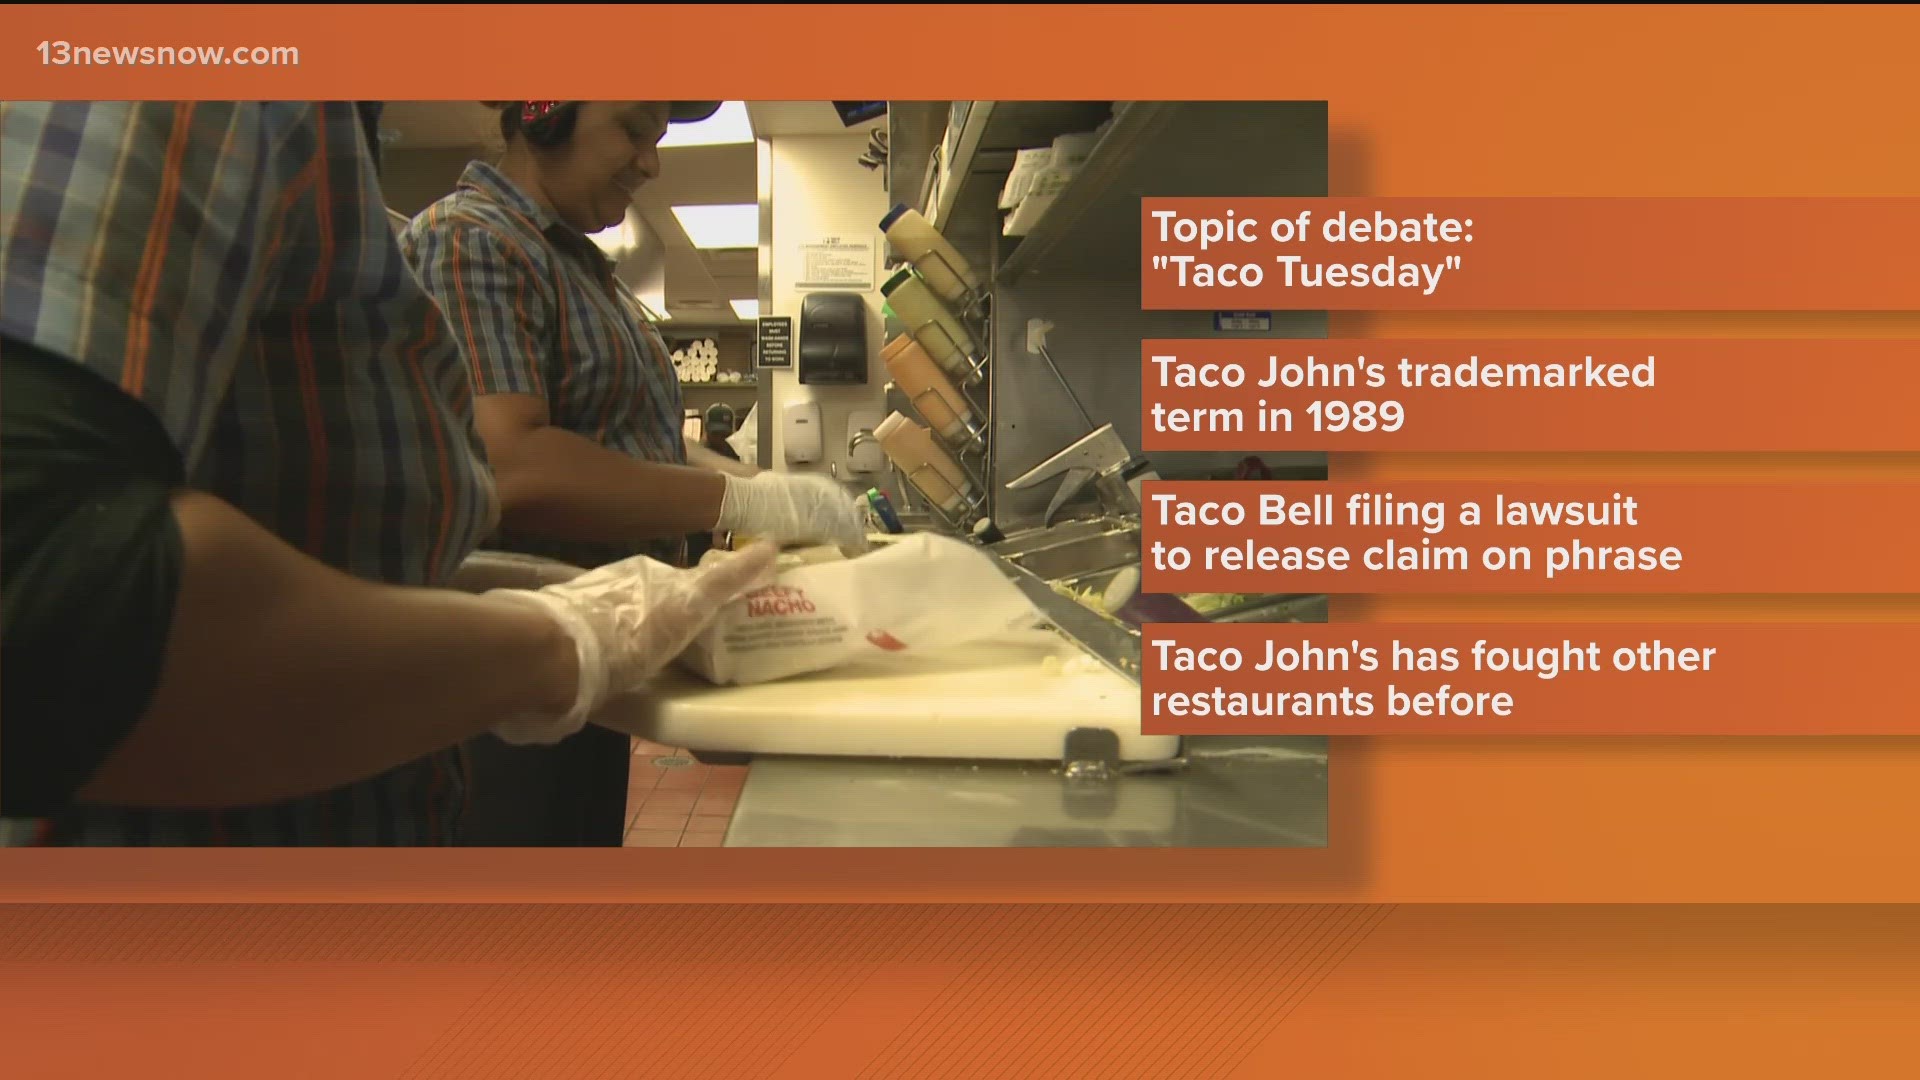 Taco Bell is asking regulators to force Wyoming's "Taco John's" to give up their trademark on the phrase "Taco Tuesday" that they've owned since 1989.